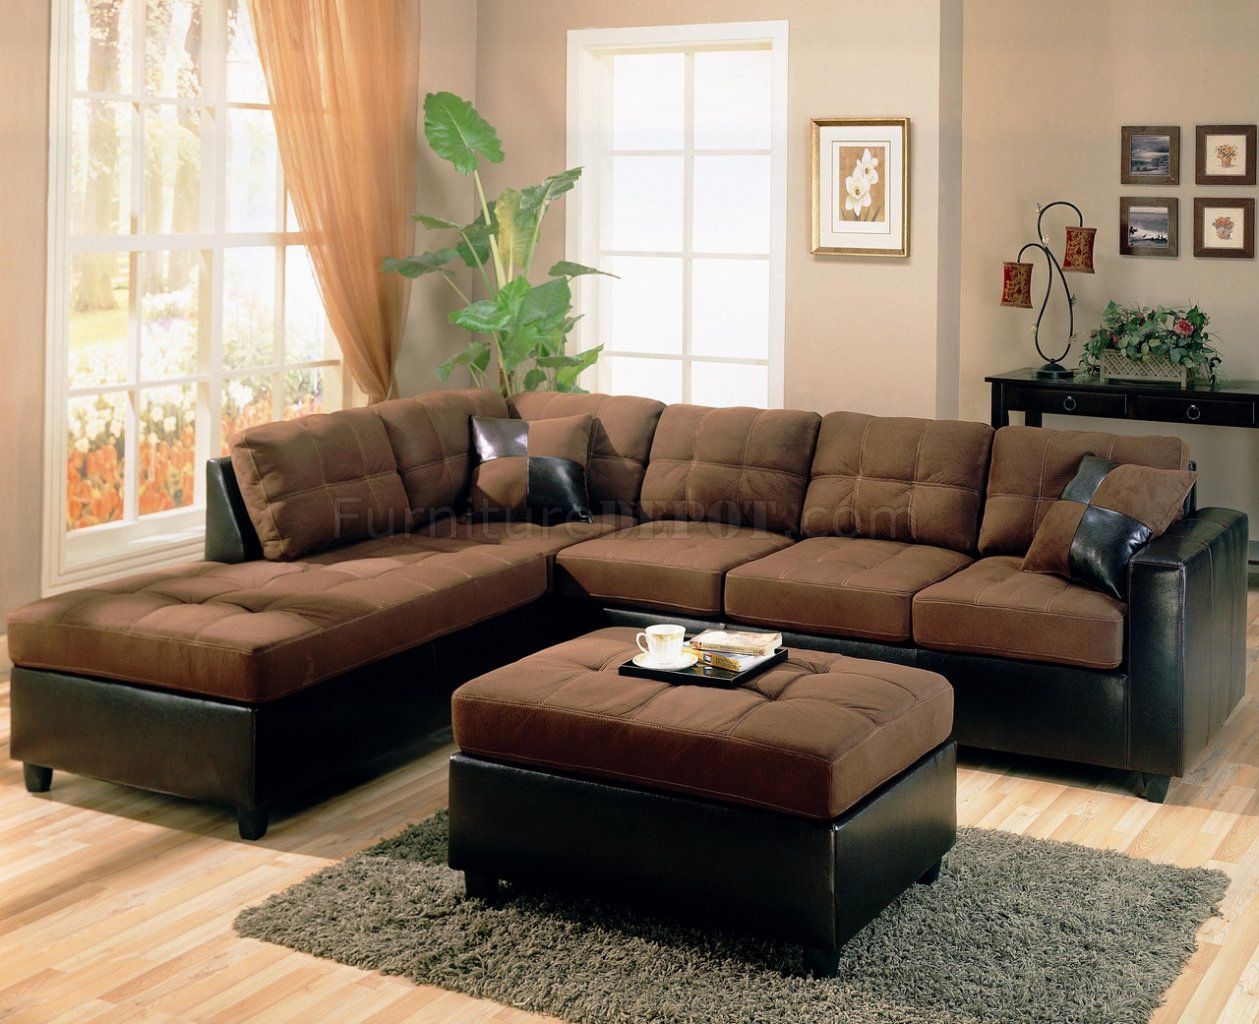 Two Tone Modern Sectional Sofa 500655 Chocolate/Dark Brown Intended For 2 Tone Chocolate Microfiber Sofas (View 5 of 15)